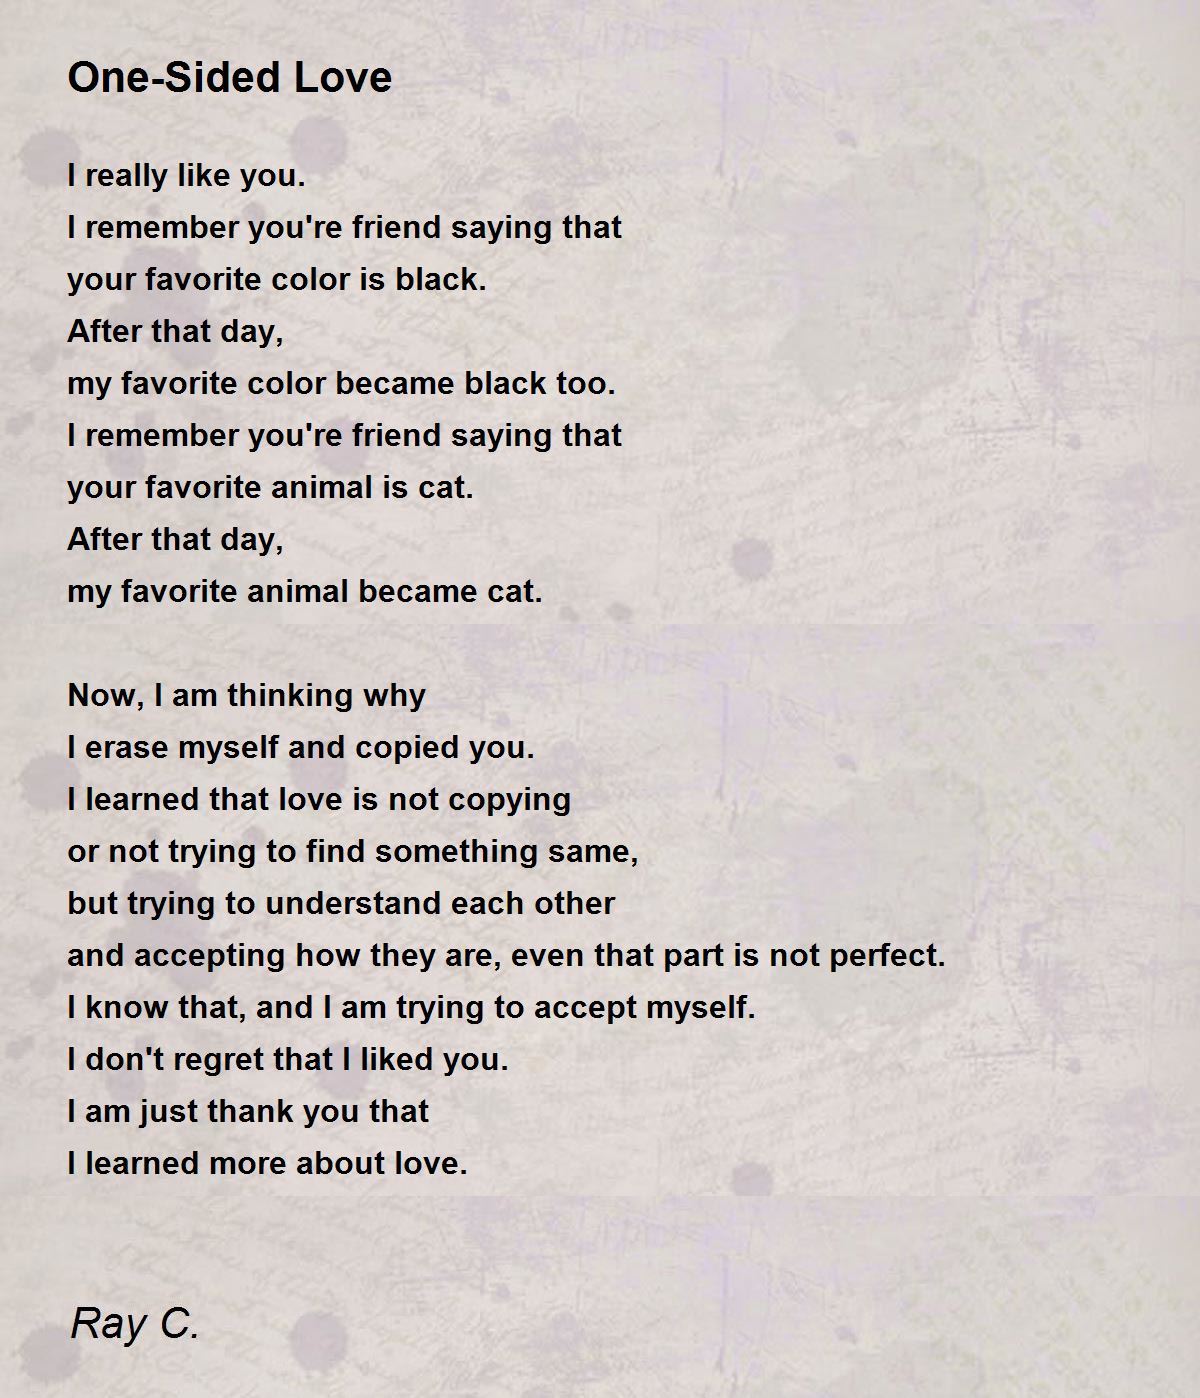 One-Sided Love - One-Sided Love Poem by Ray C.